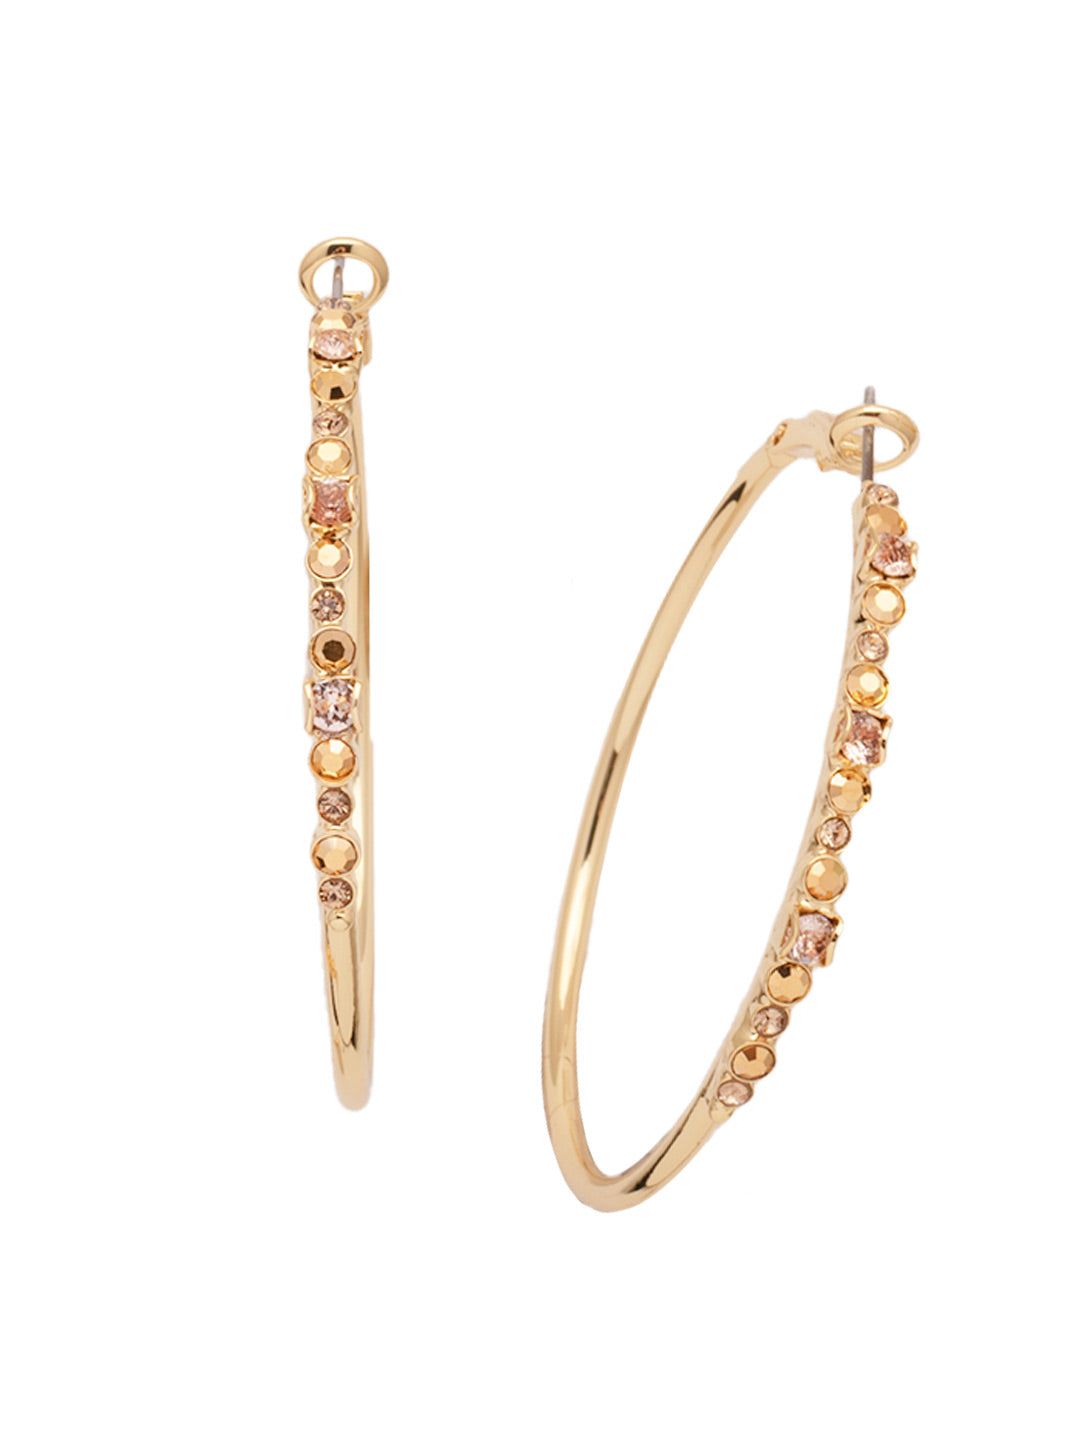 Hoopla Hoop Earrings - EDN79BGRSU - <p>Worth making a fuss over, these crystal hoop earrings make a statement without feeling heavy and that's what the hoopla is about! From Sorrelli's Raw Sugar collection in our Bright Gold-tone finish.</p>